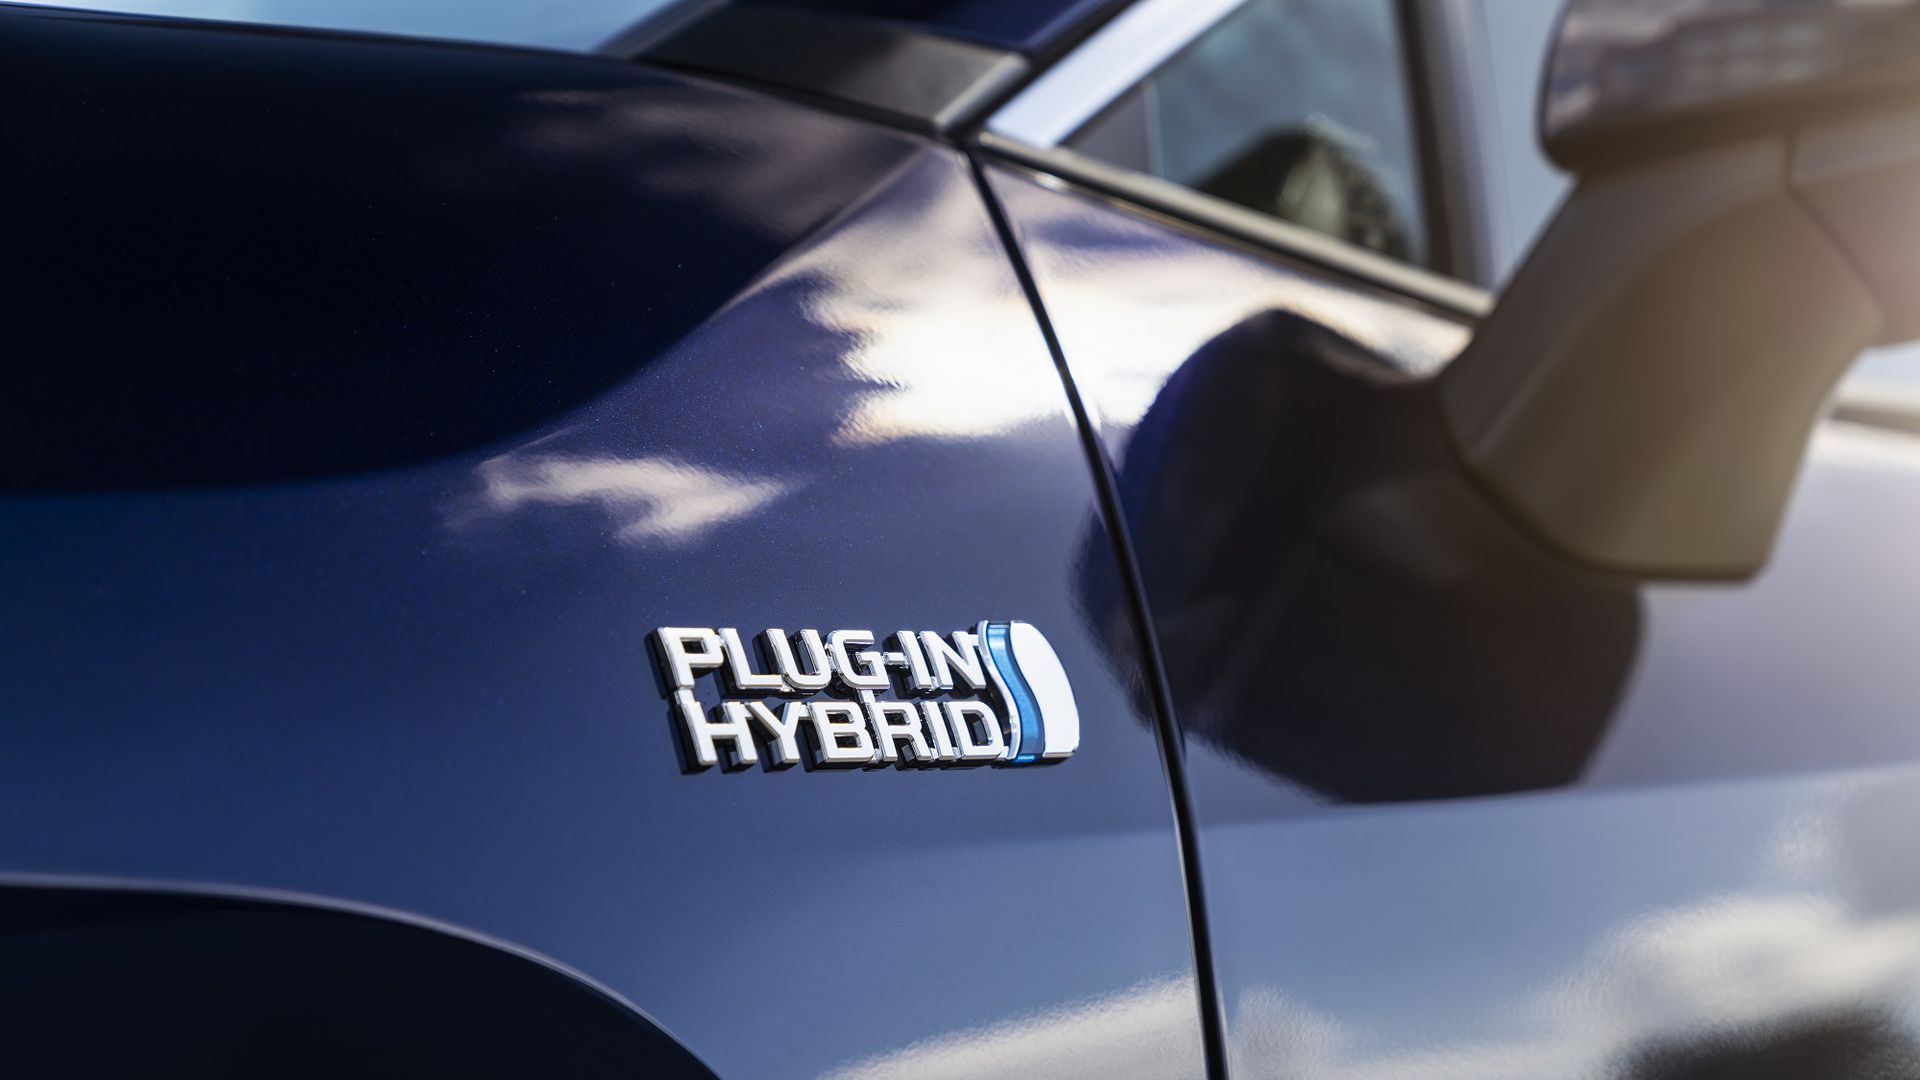 Picture of the side of a car that says "plug-in hybrid"